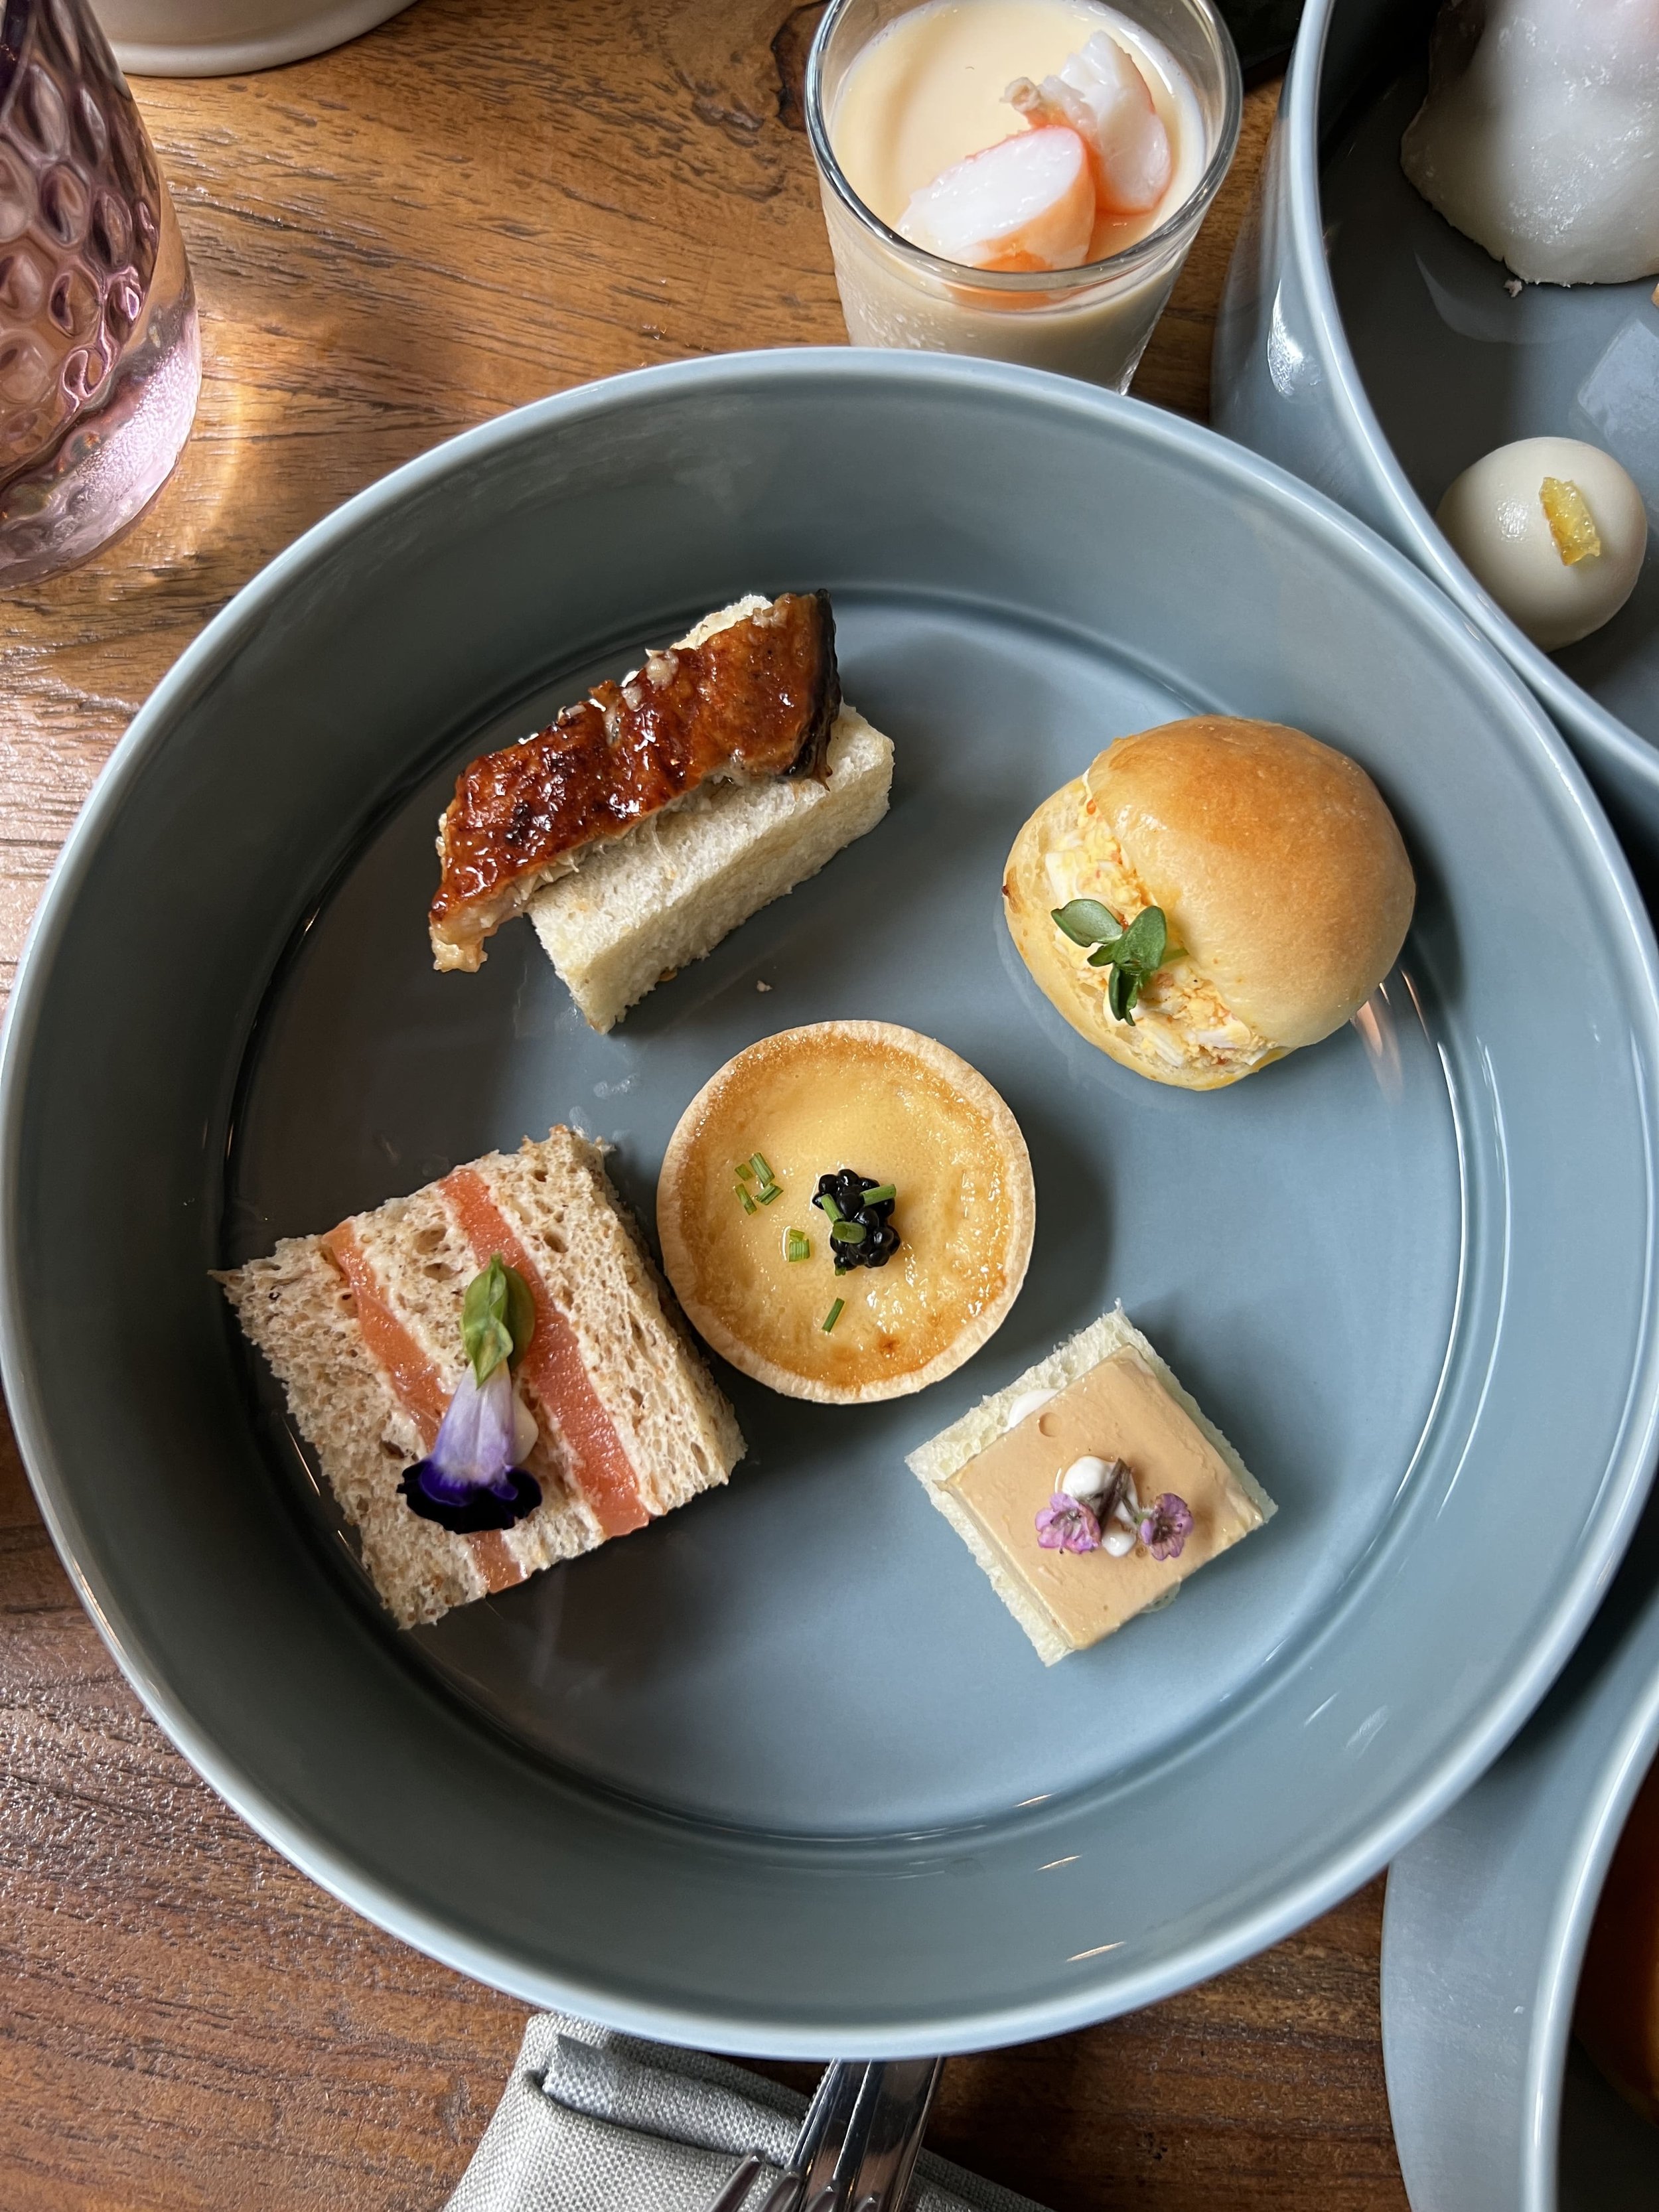 Four Seasons Afternoon tea Singapore review.